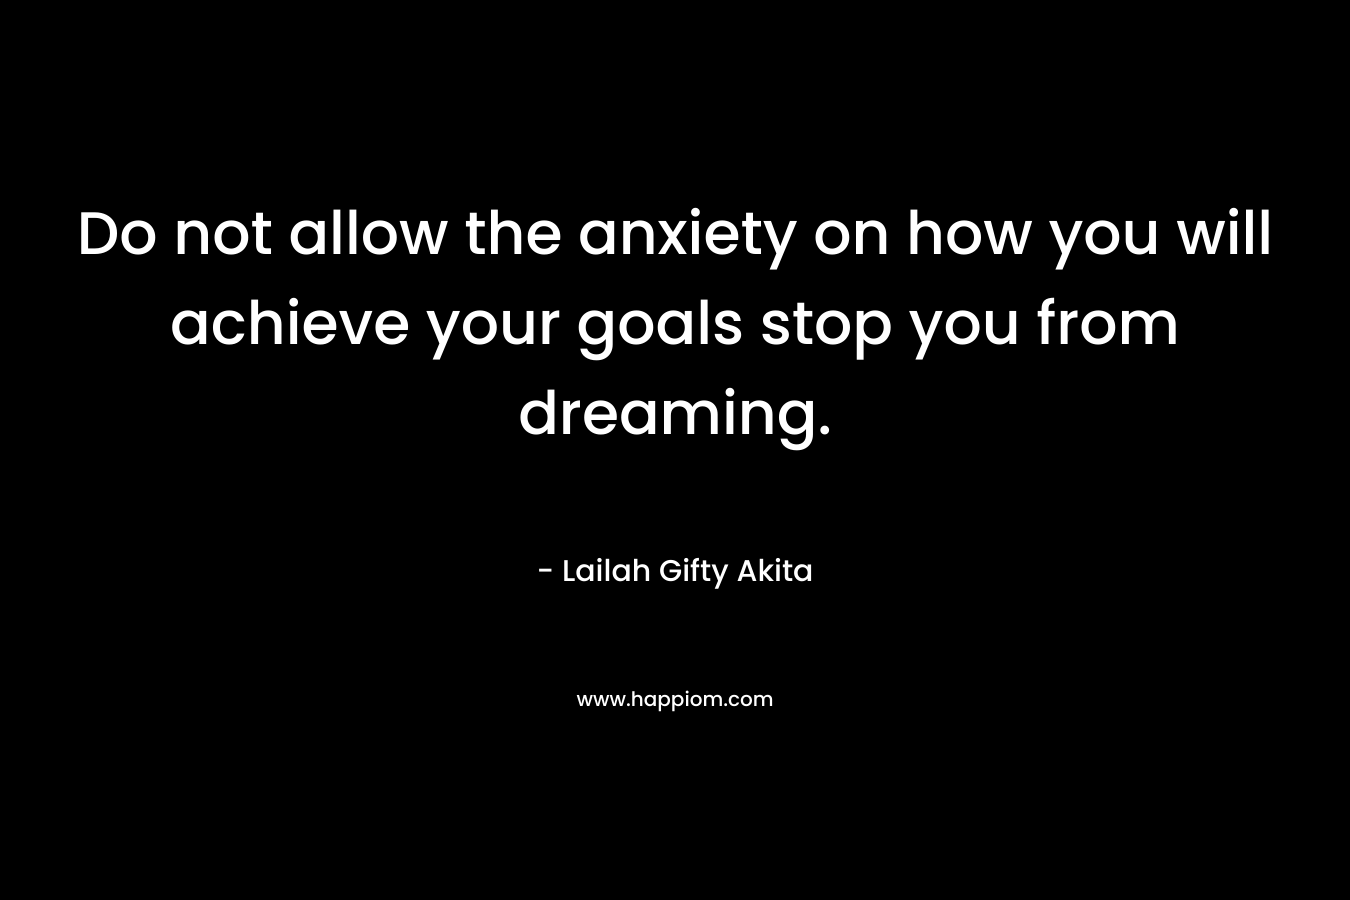 Do not allow the anxiety on how you will achieve your goals stop you from dreaming. – Lailah Gifty Akita